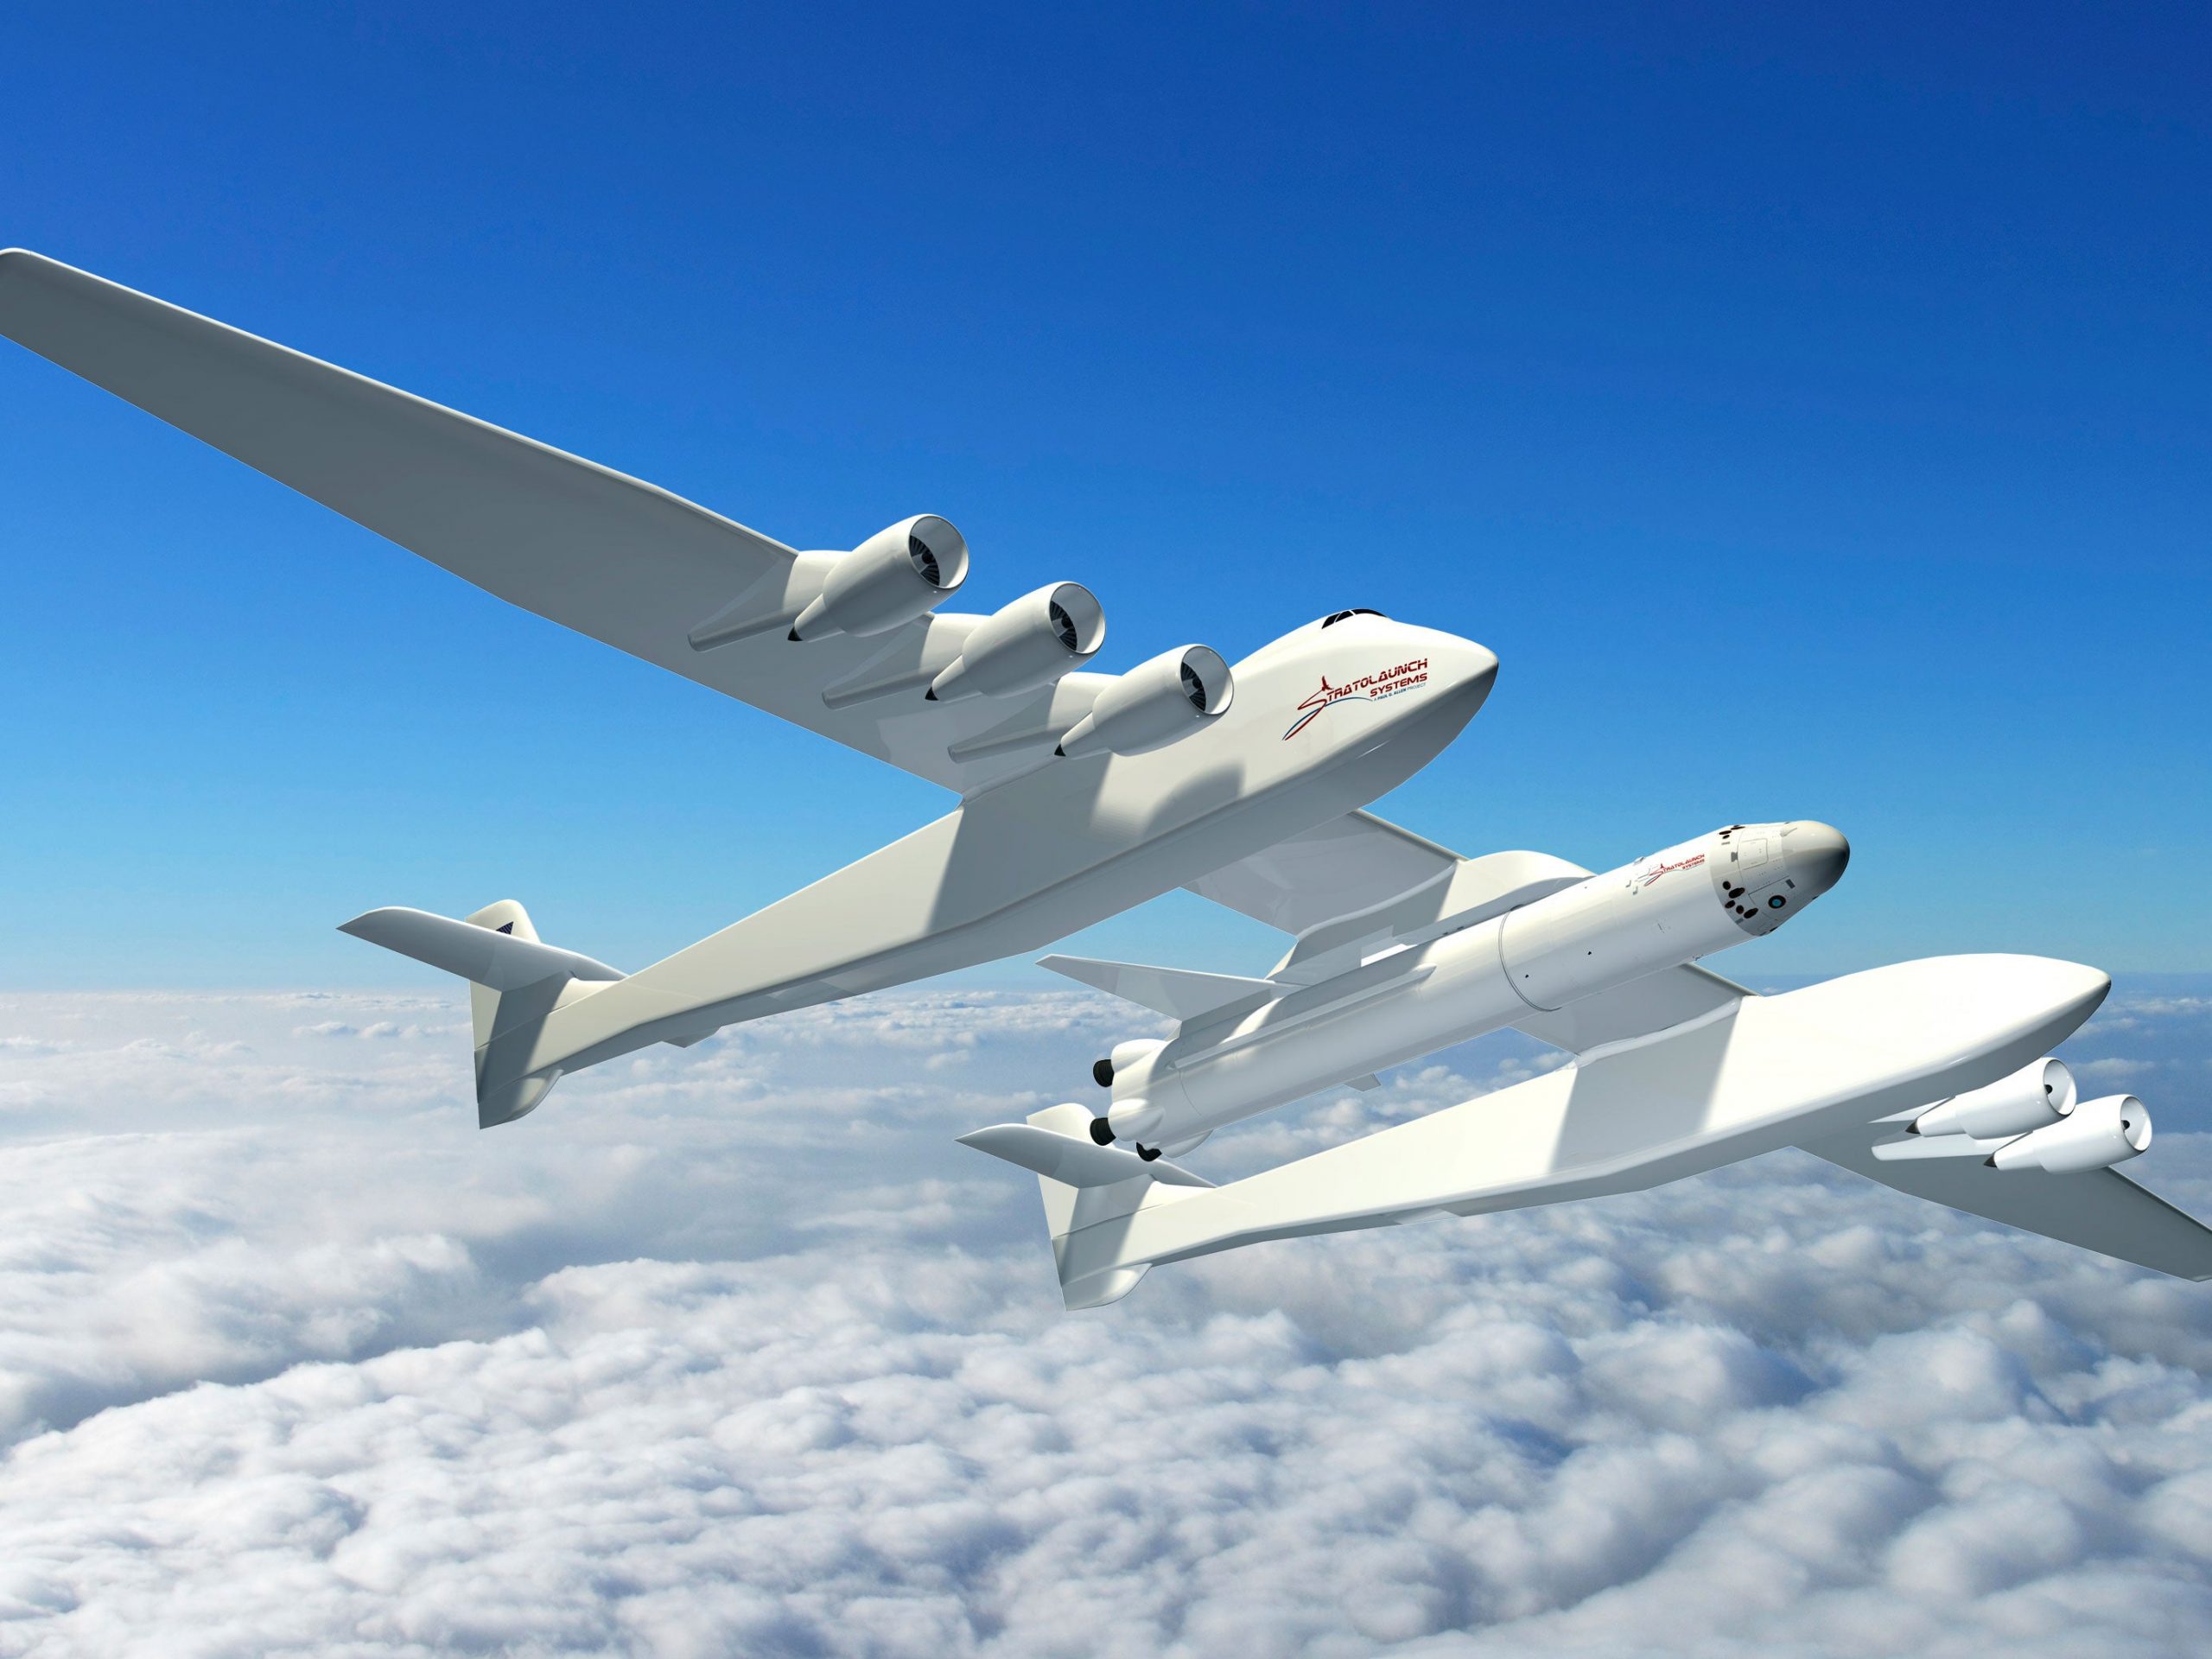 Stratolaunch: Biggest Plane In The World To Take Off Next pour Avions Planes 